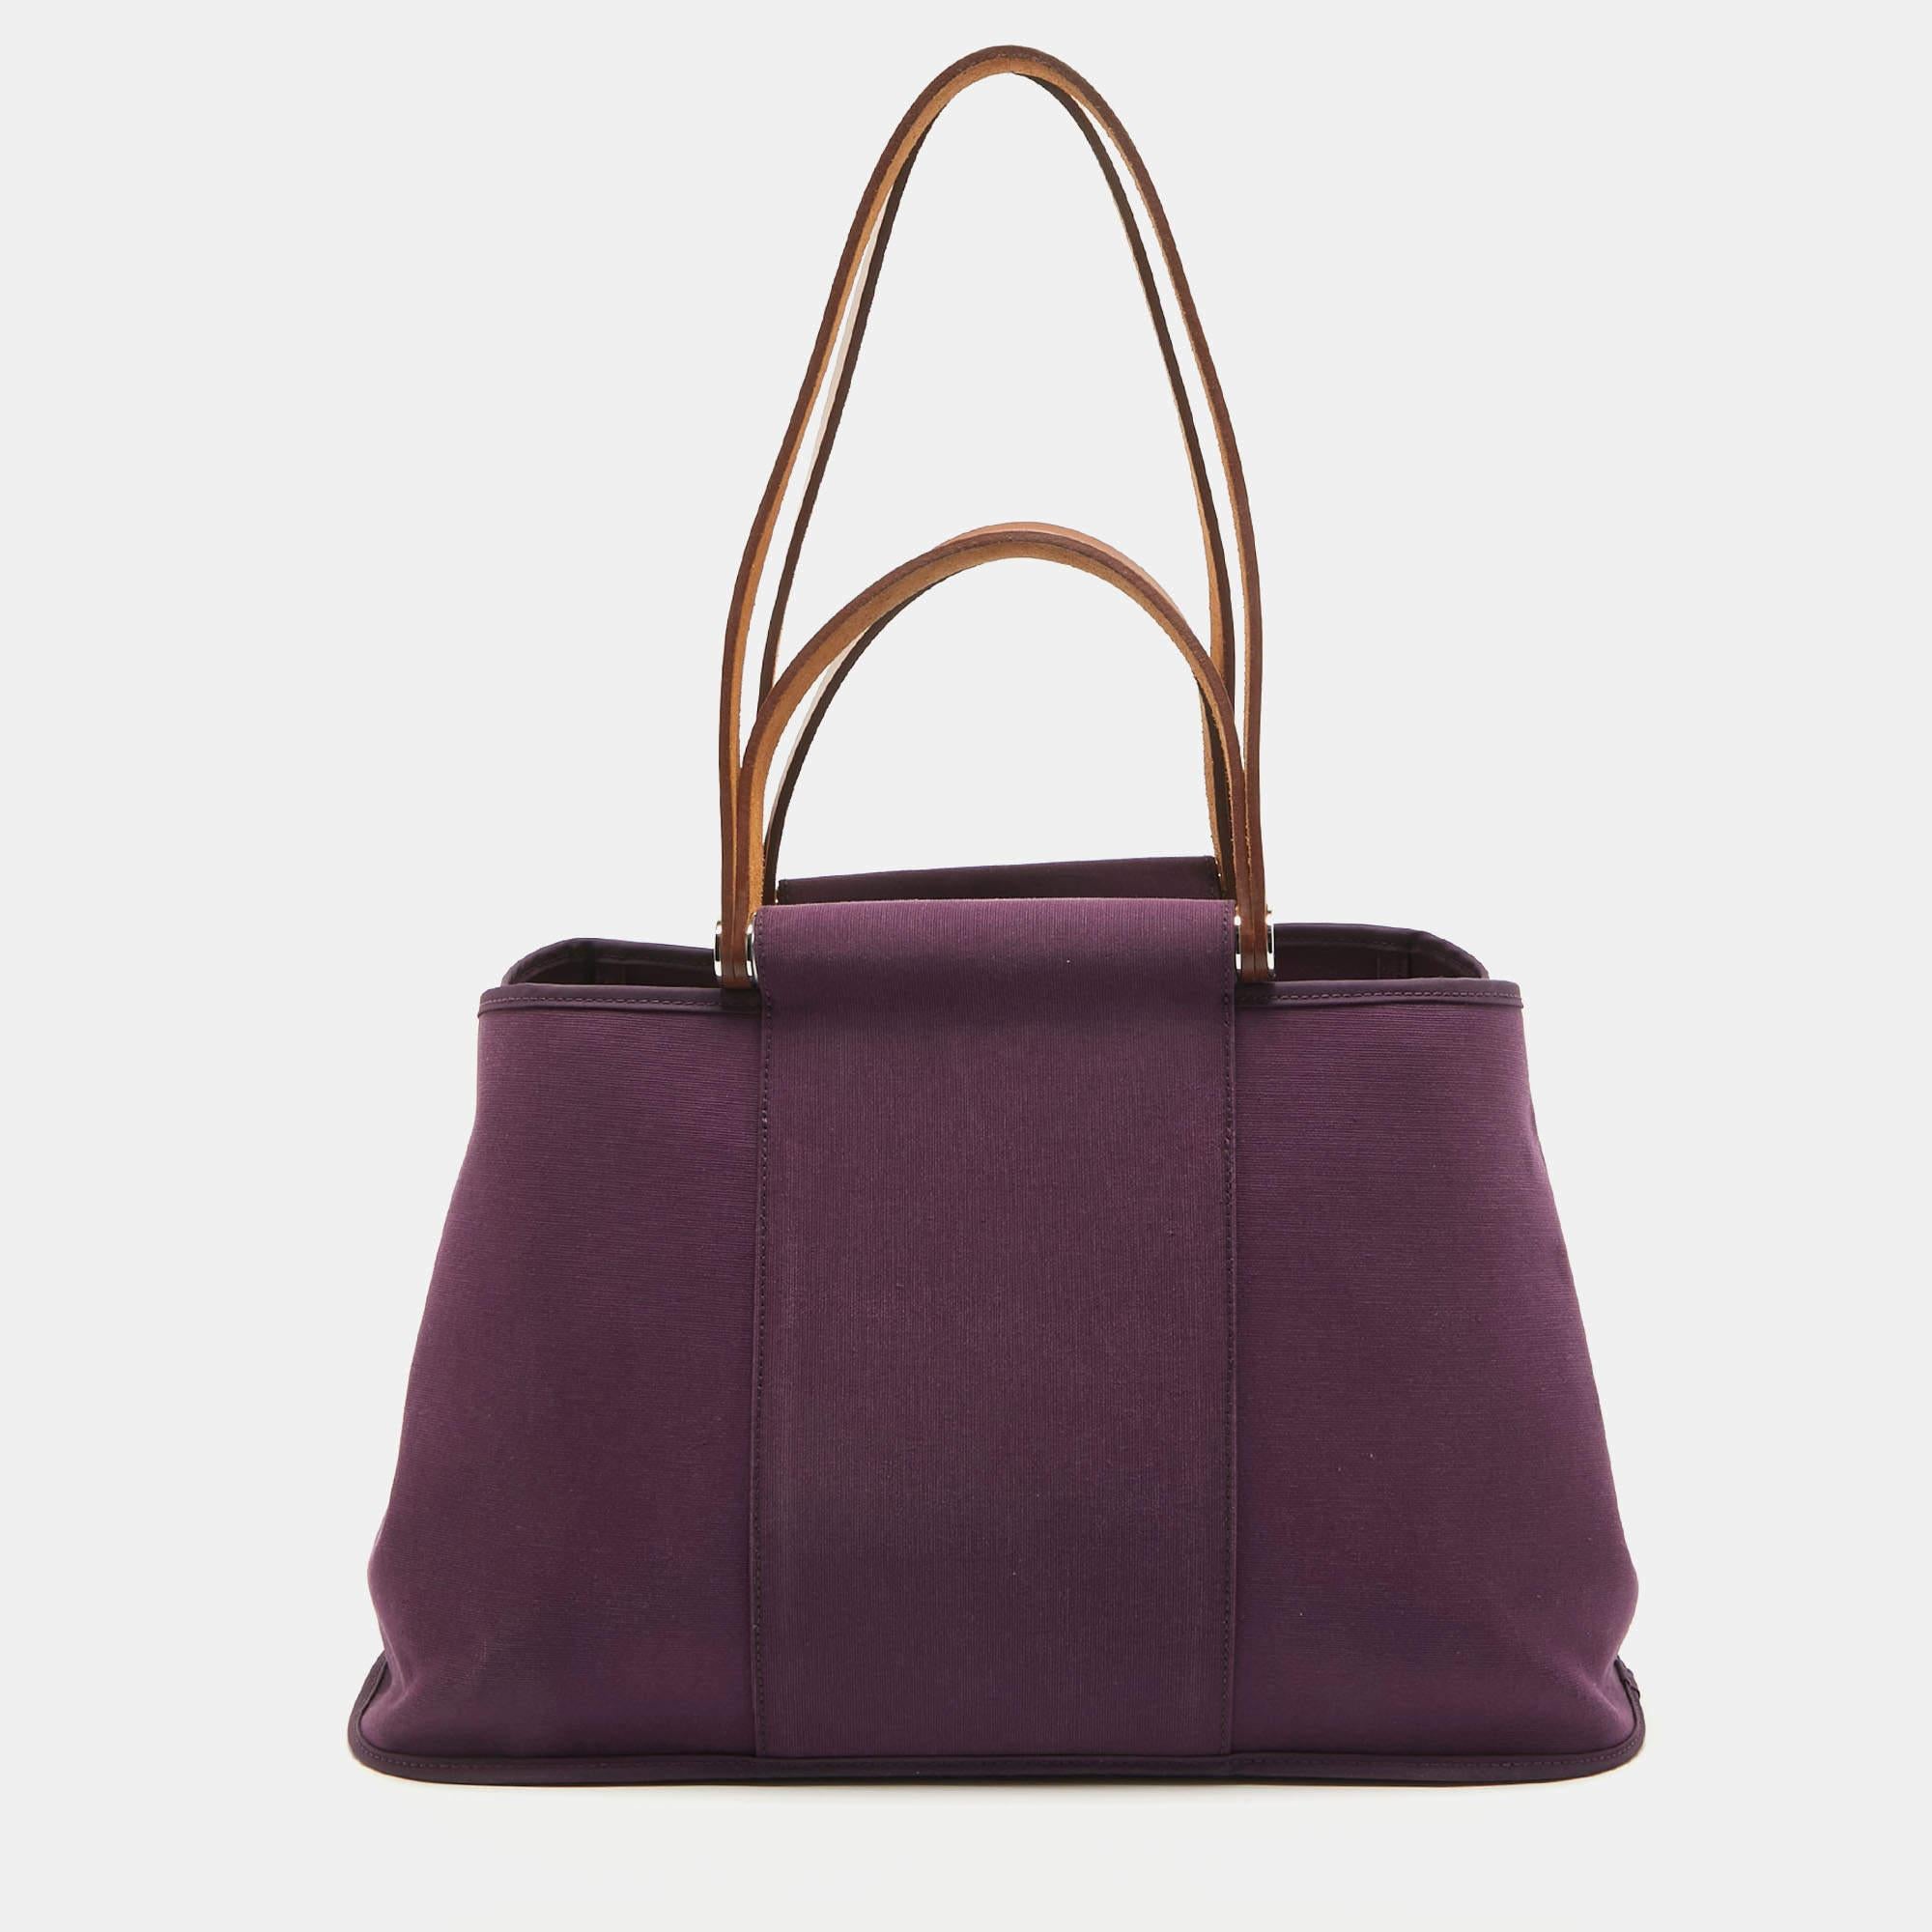 Hermès delivers the highest quality luxury handbags for women and men, making each design a luxury worth buying. The Cabag is crafted from the canvas into a relaxed shape. It has durable leather handles, two of which are shorter than the others. The